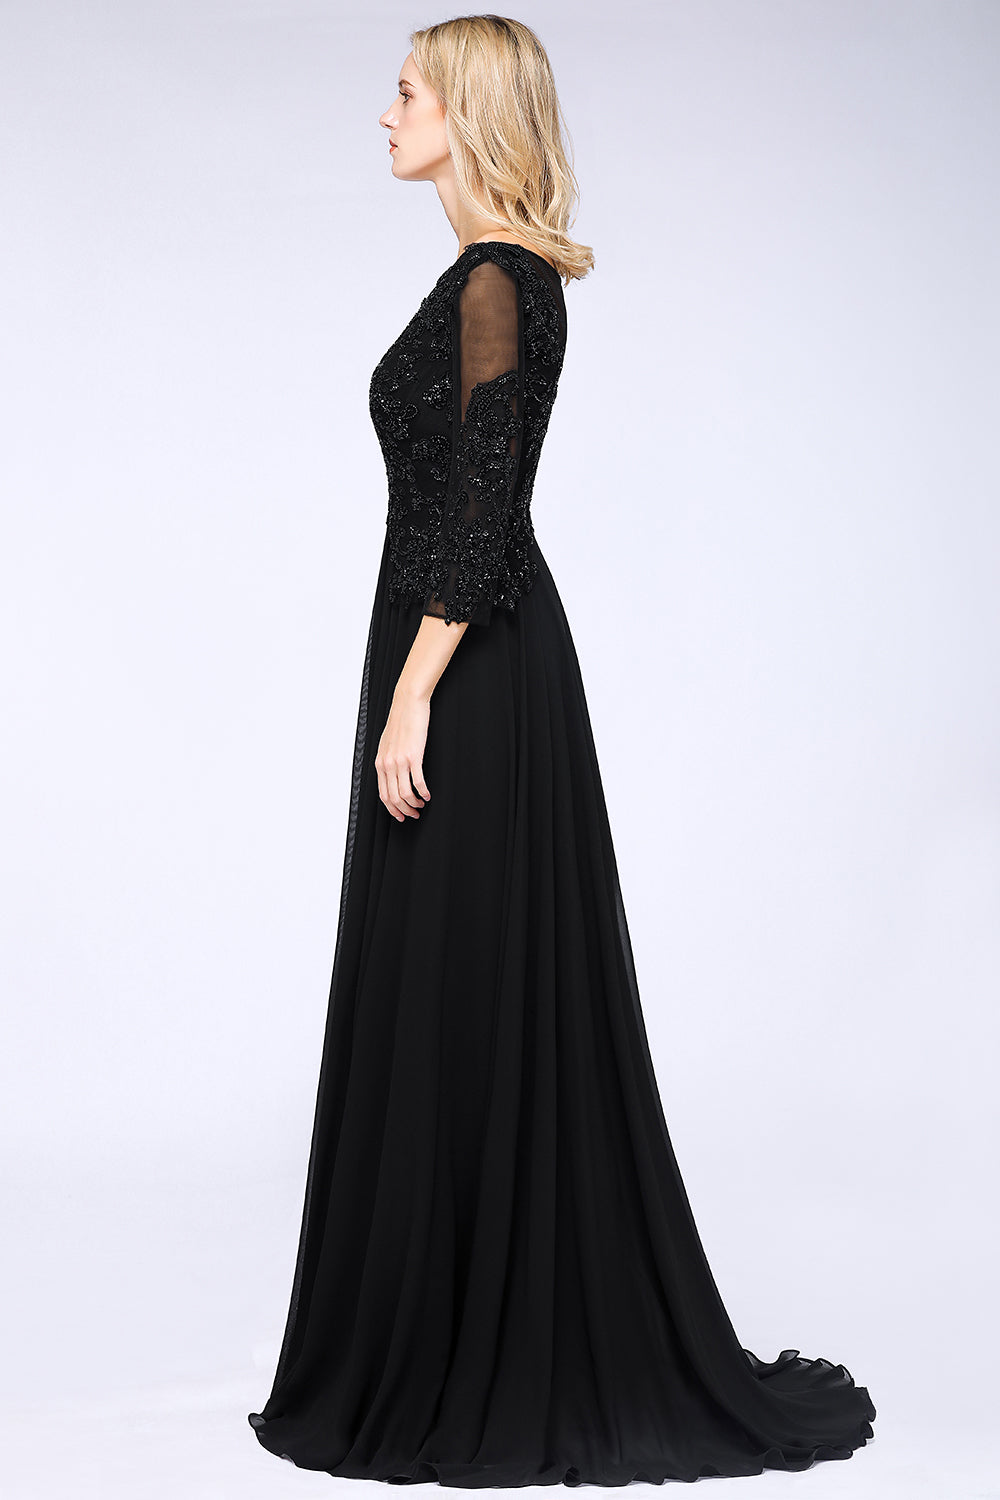 Black Long A-line Chiffon Beads Appliques Bridesmaid Dress with Sleeves-BIZTUNNEL